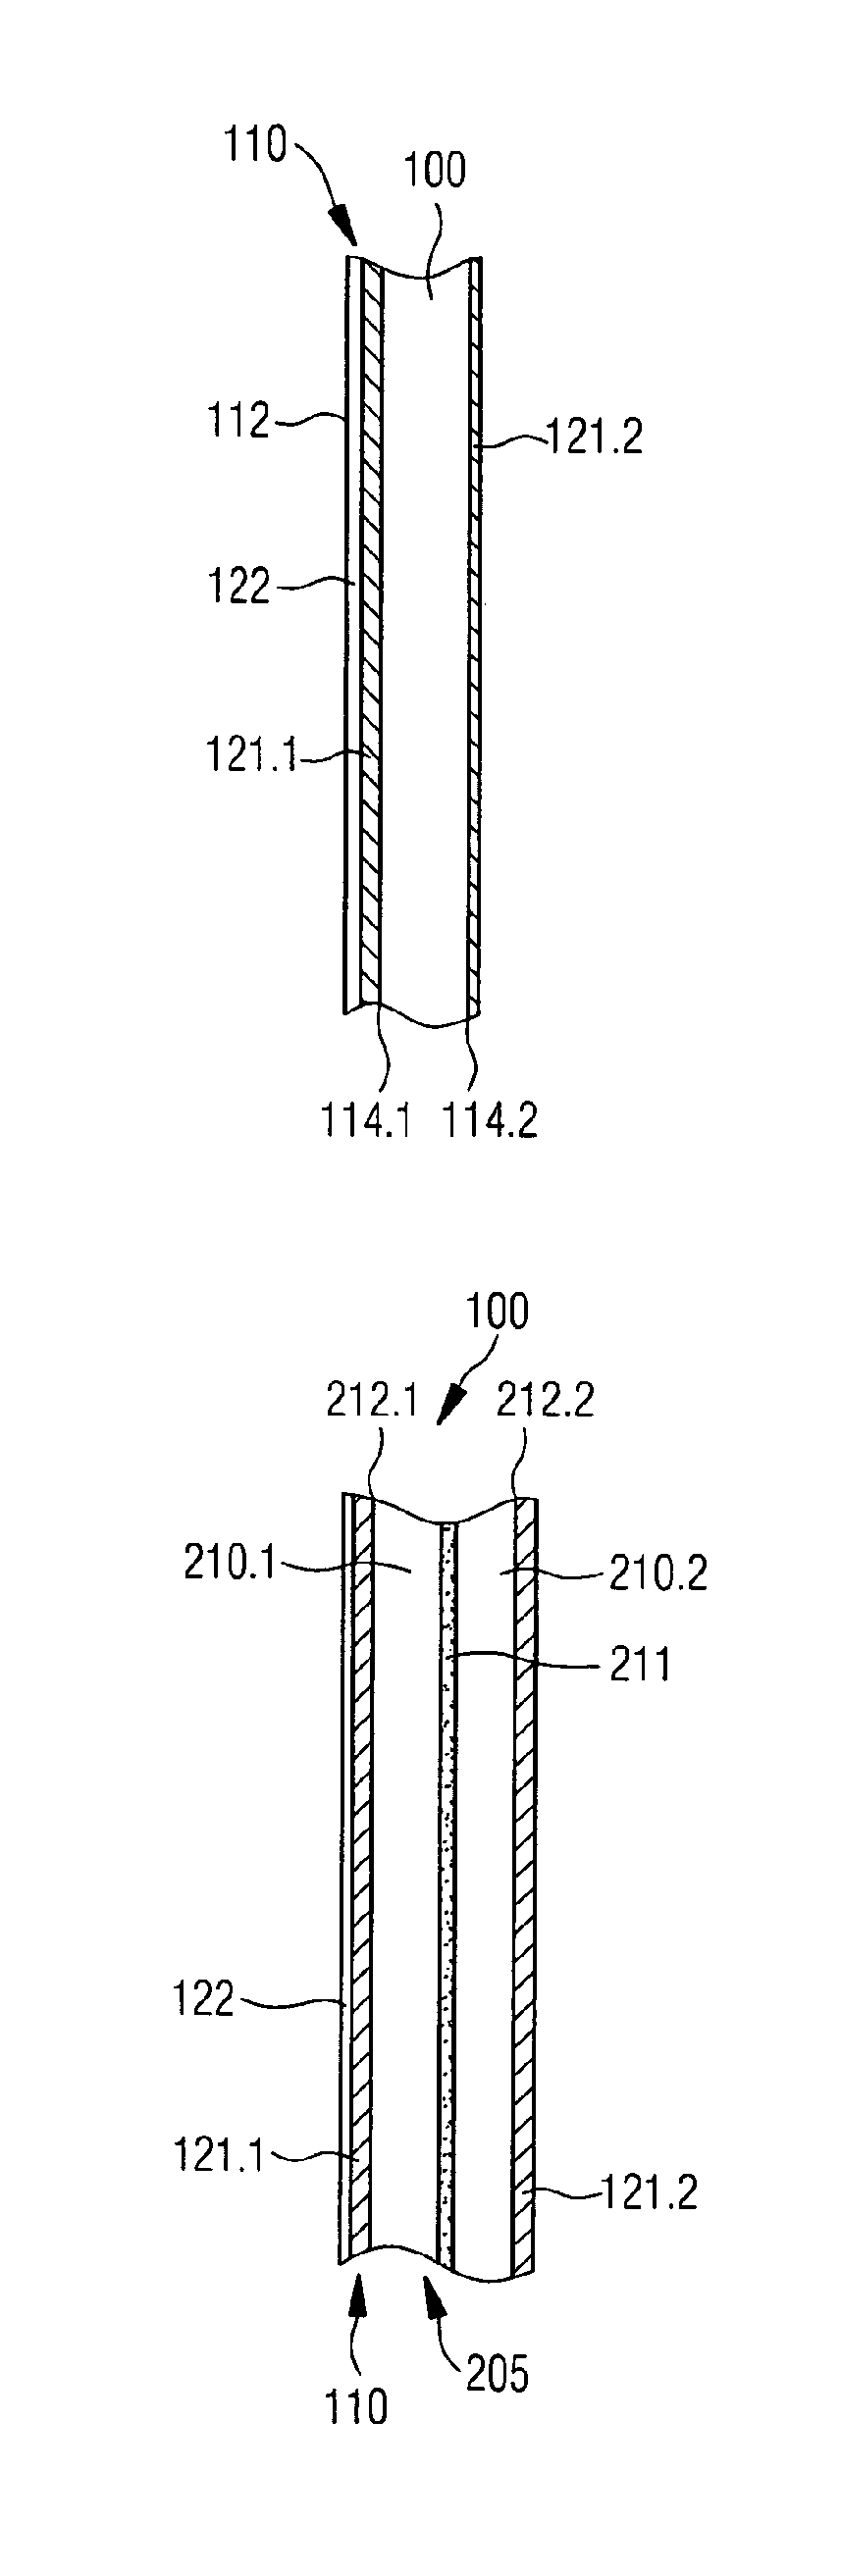 Device having reduced friction properties